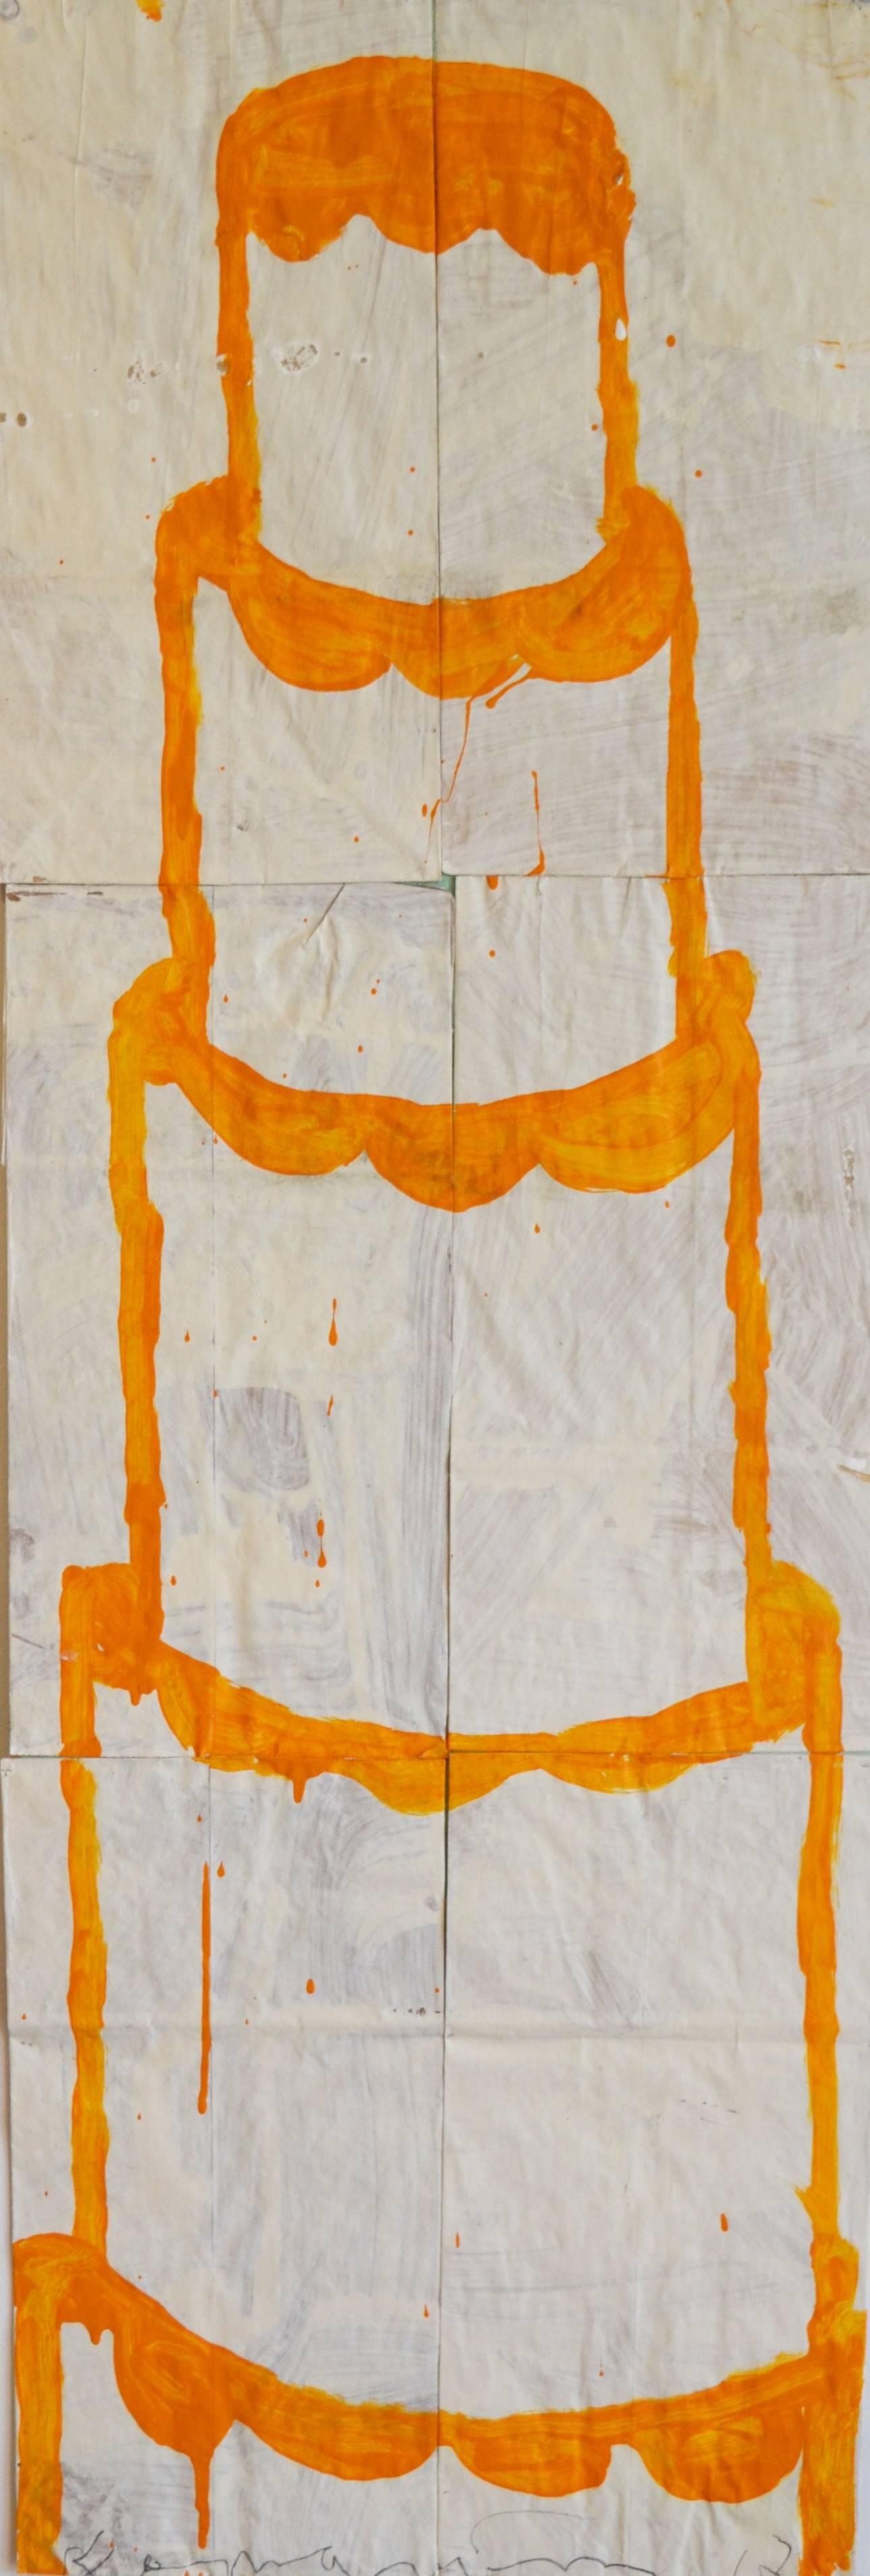 'Cake 1' by contemporary artist, Gary Komarin, 2012. Acrylic on paper bags, 41 x 13.50 inches. The faux naive style painting of a five tier cake is outlined in orange on a cream background. Framed in white wood.

Born in 1951 in New York City, Gary